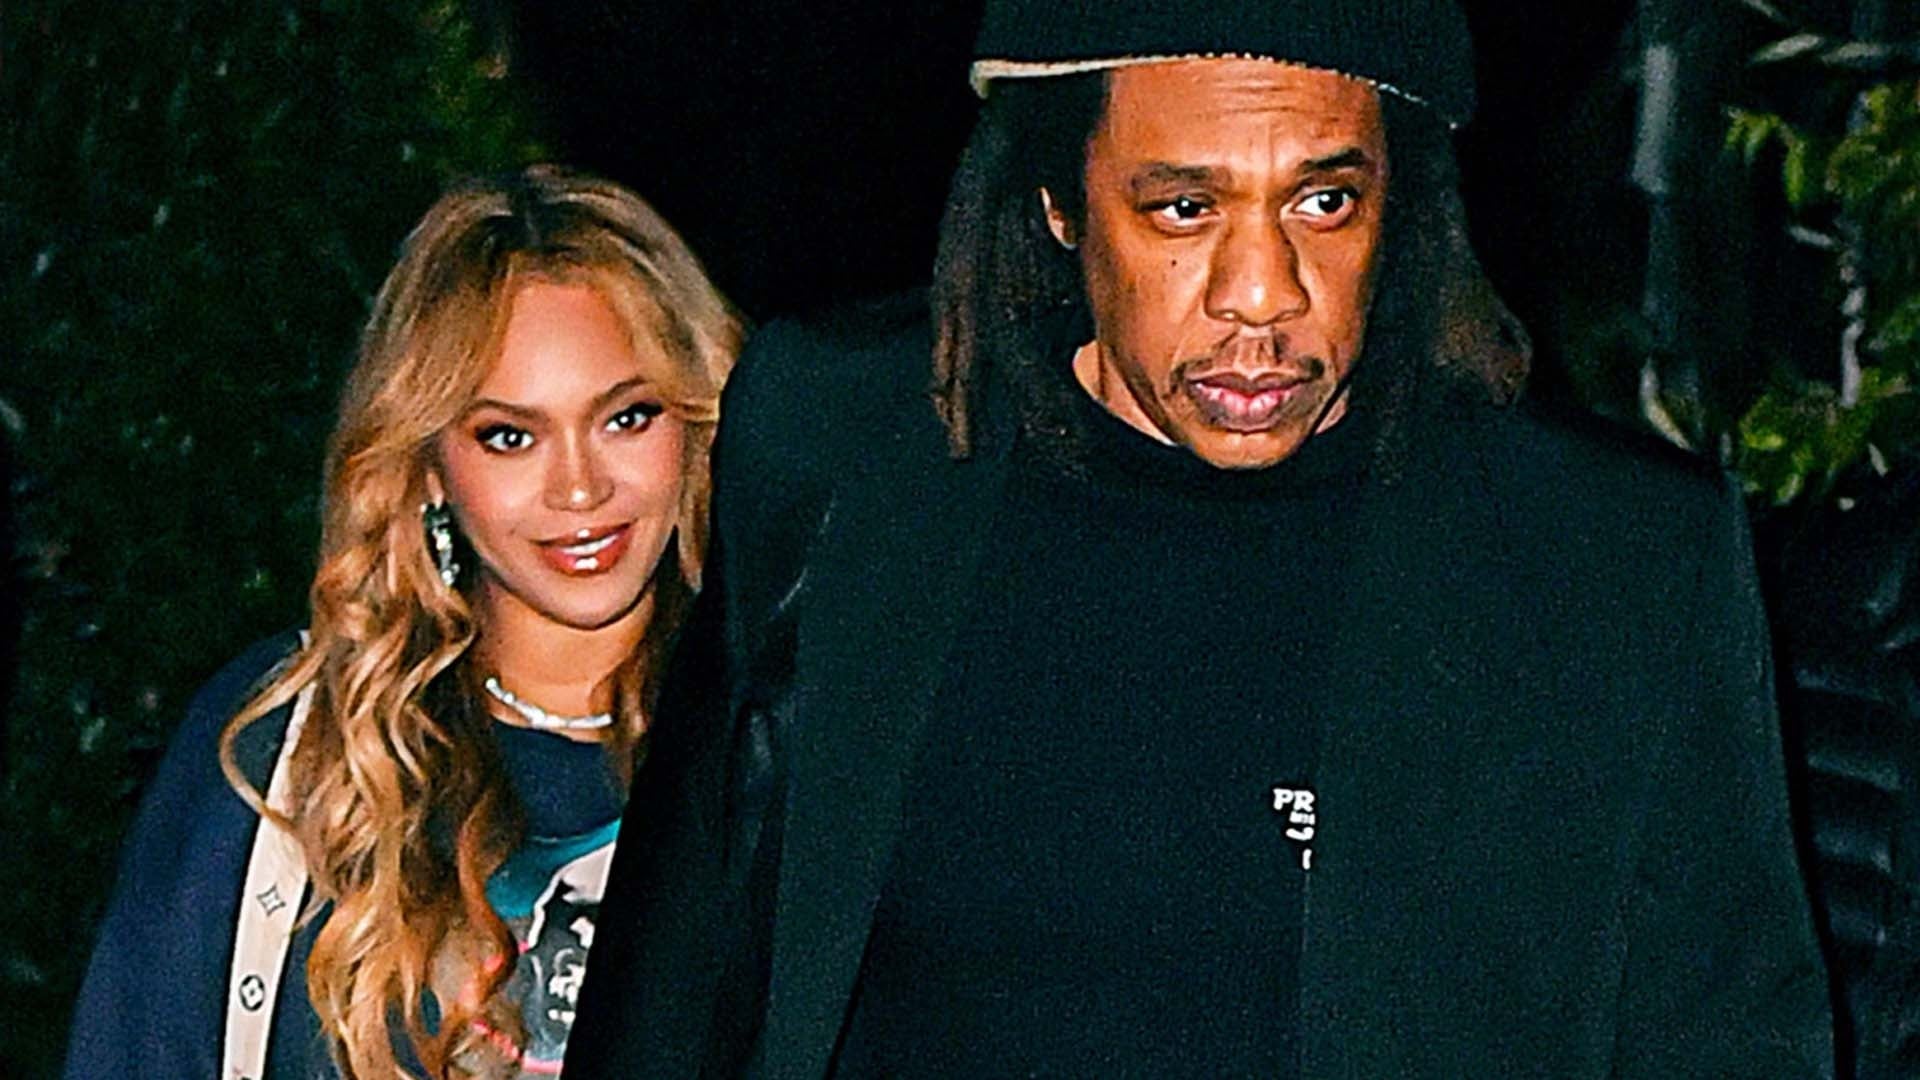 Beyoncé and JAY-Z Show Rare PDA After LA Dinner Date